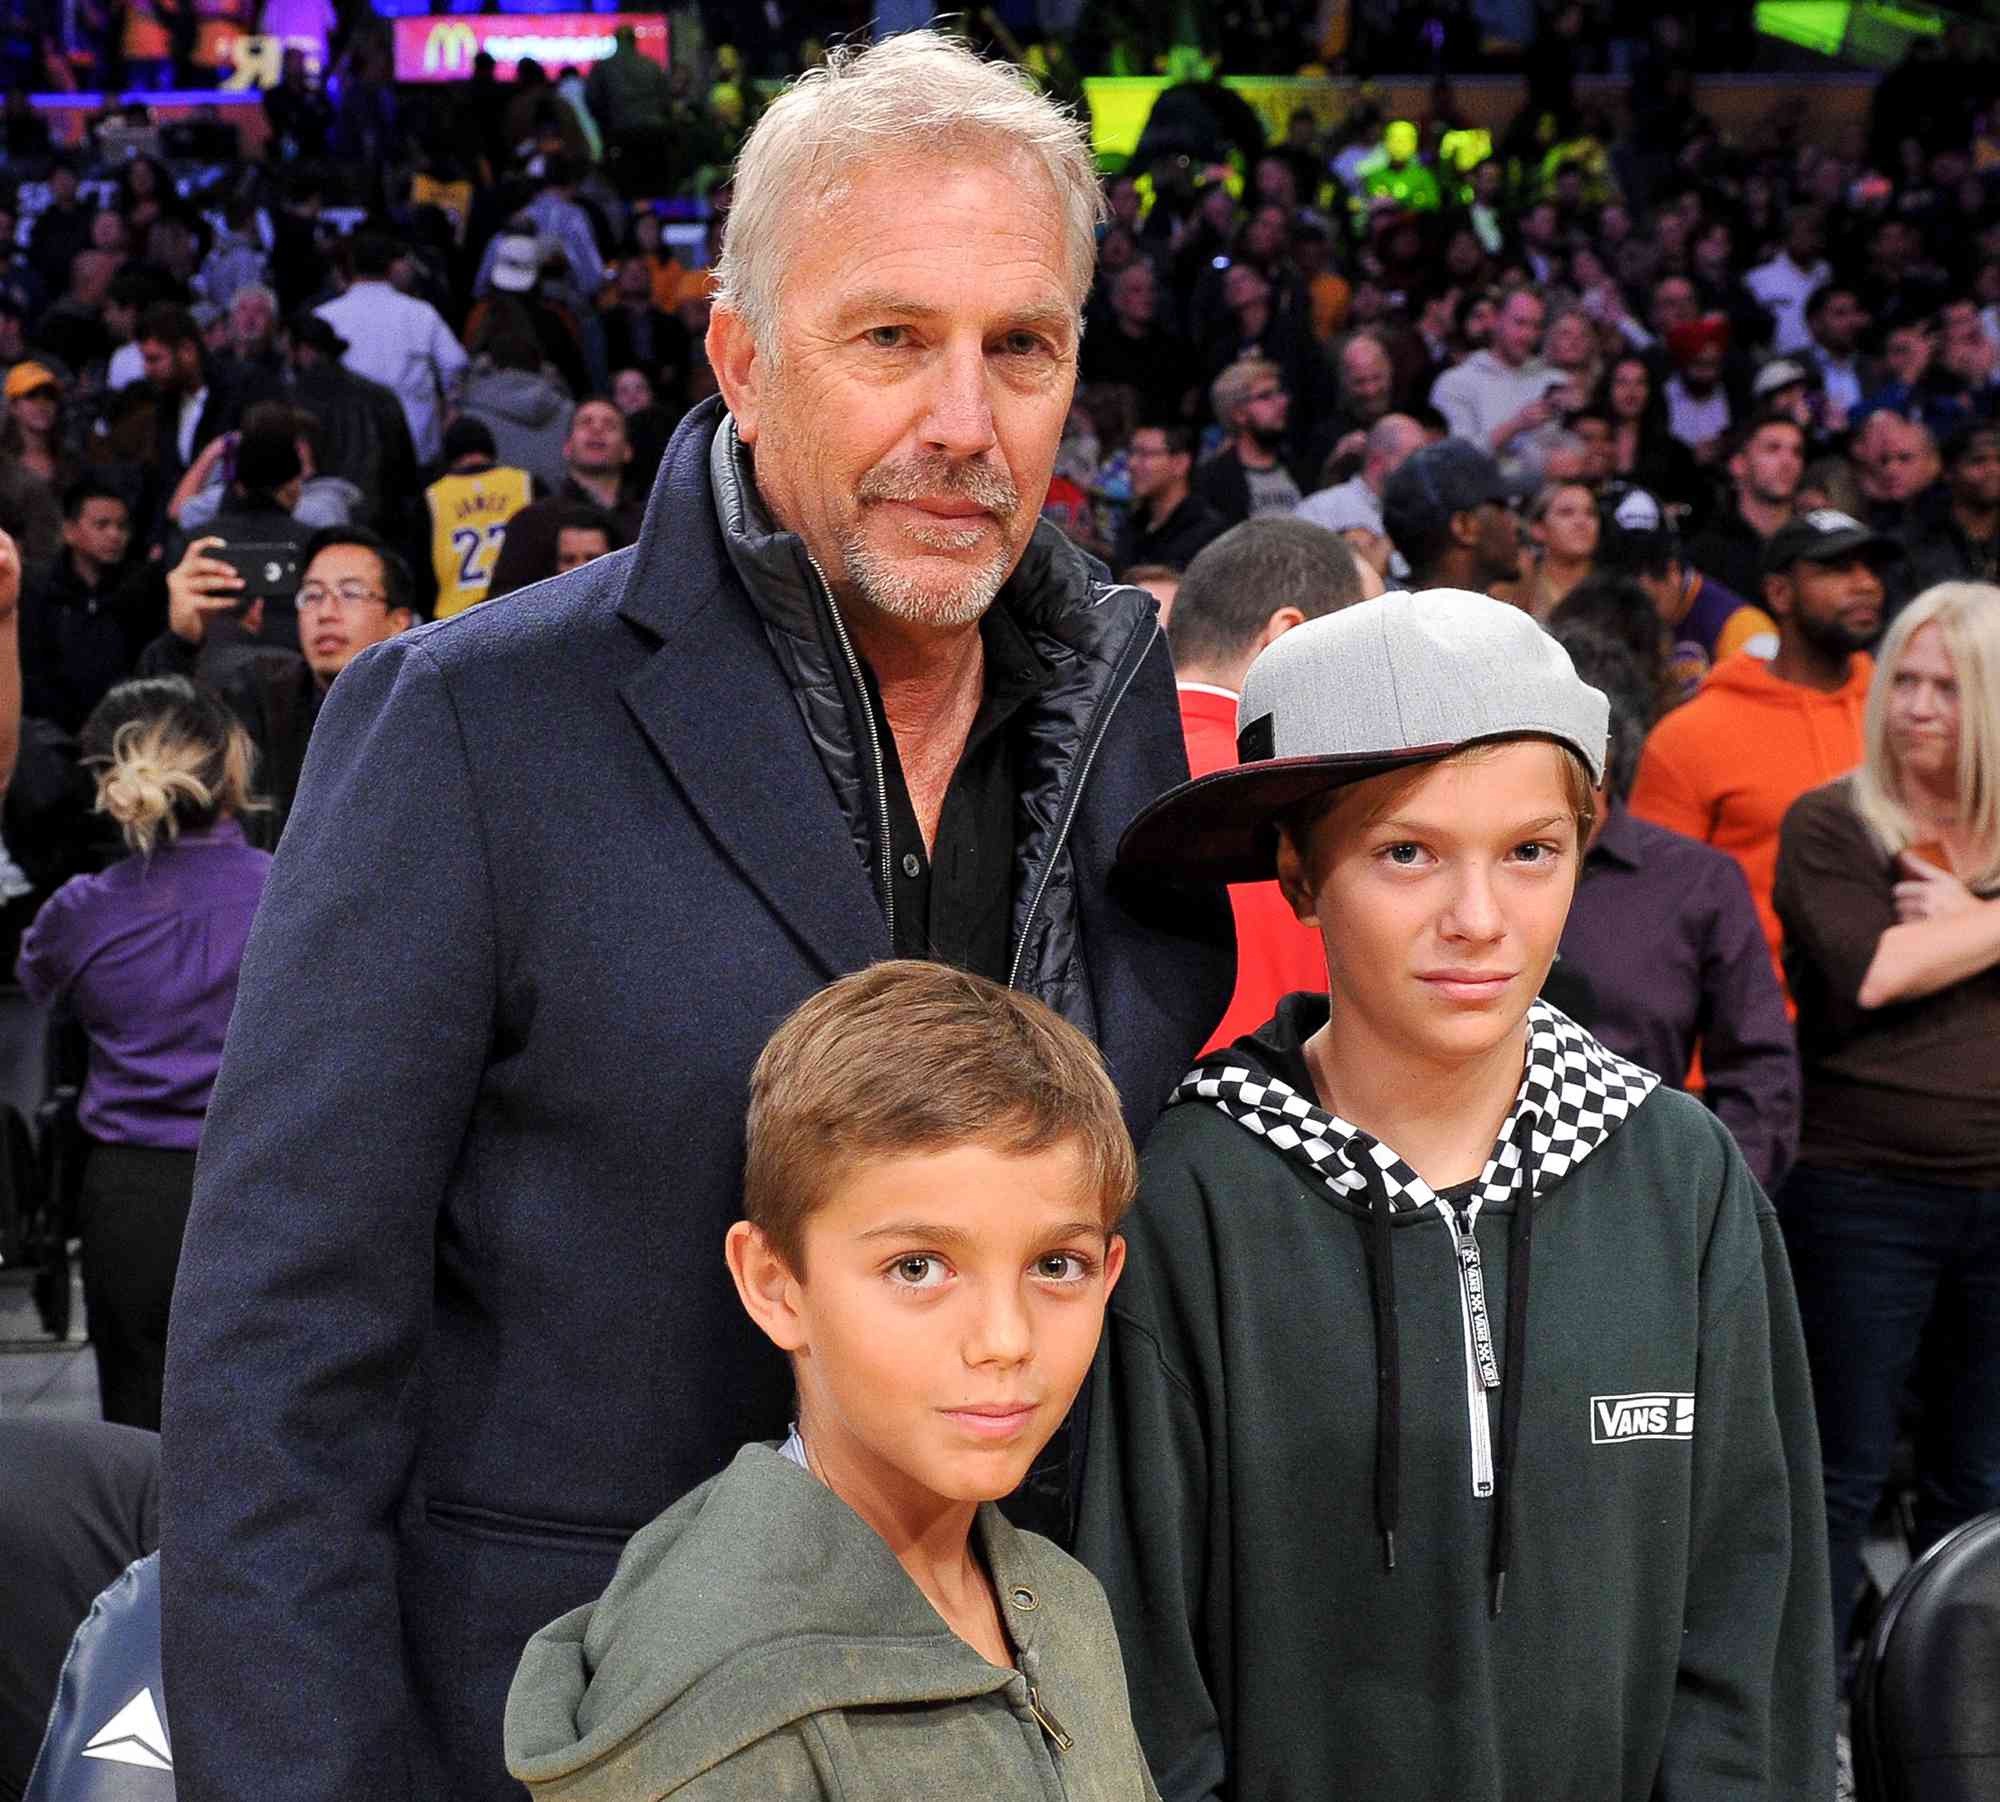 Kevin Costner, Hayes Logan Costner and Cayden Wyatt Costner attend a basketball game between the Los Angeles Lakers and the Miami Heat at Staples Center on December 10, 2018 in Los Angeles, California